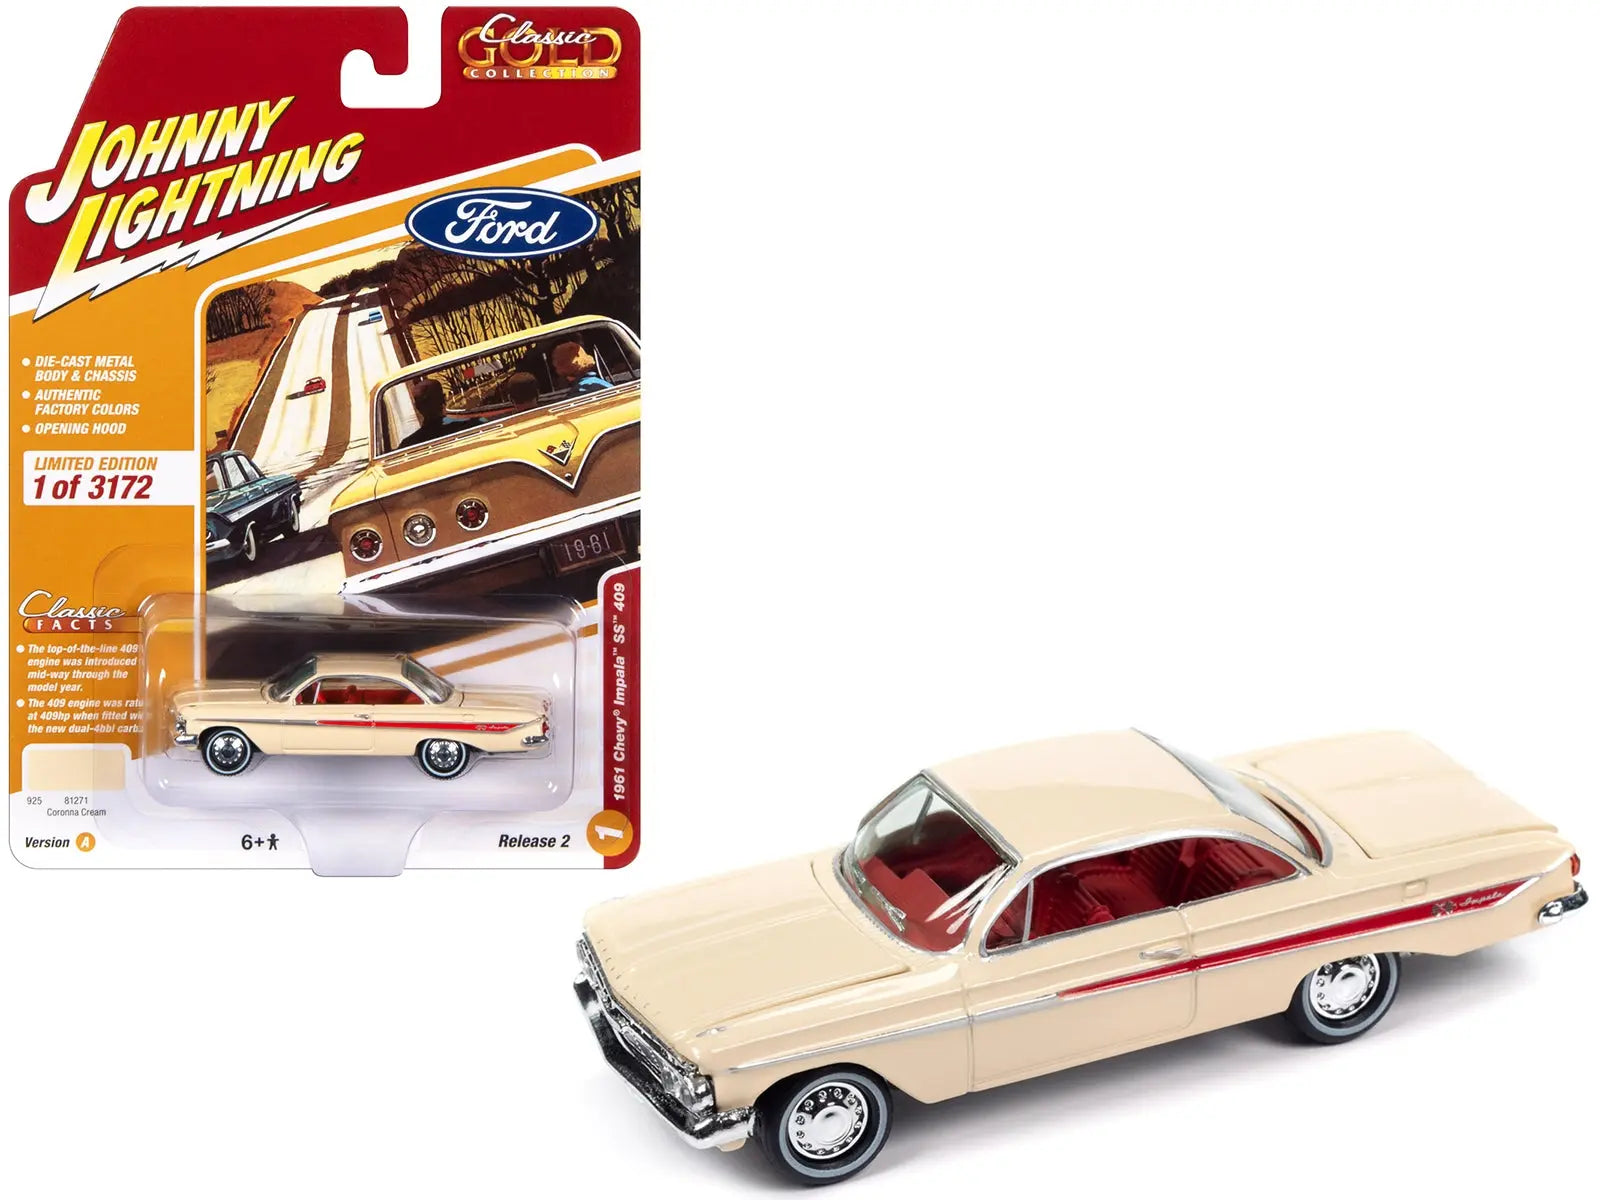 1961 Chevrolet Impala SS 409 Coronna Cream with Red Stripes and Interior "Classic Gold Collection" 2023 Release 2 Limited Edition to 3172 pieces Worldwide 1/64 Diecast Model Car by Johnny Lightning Johnny Lightning